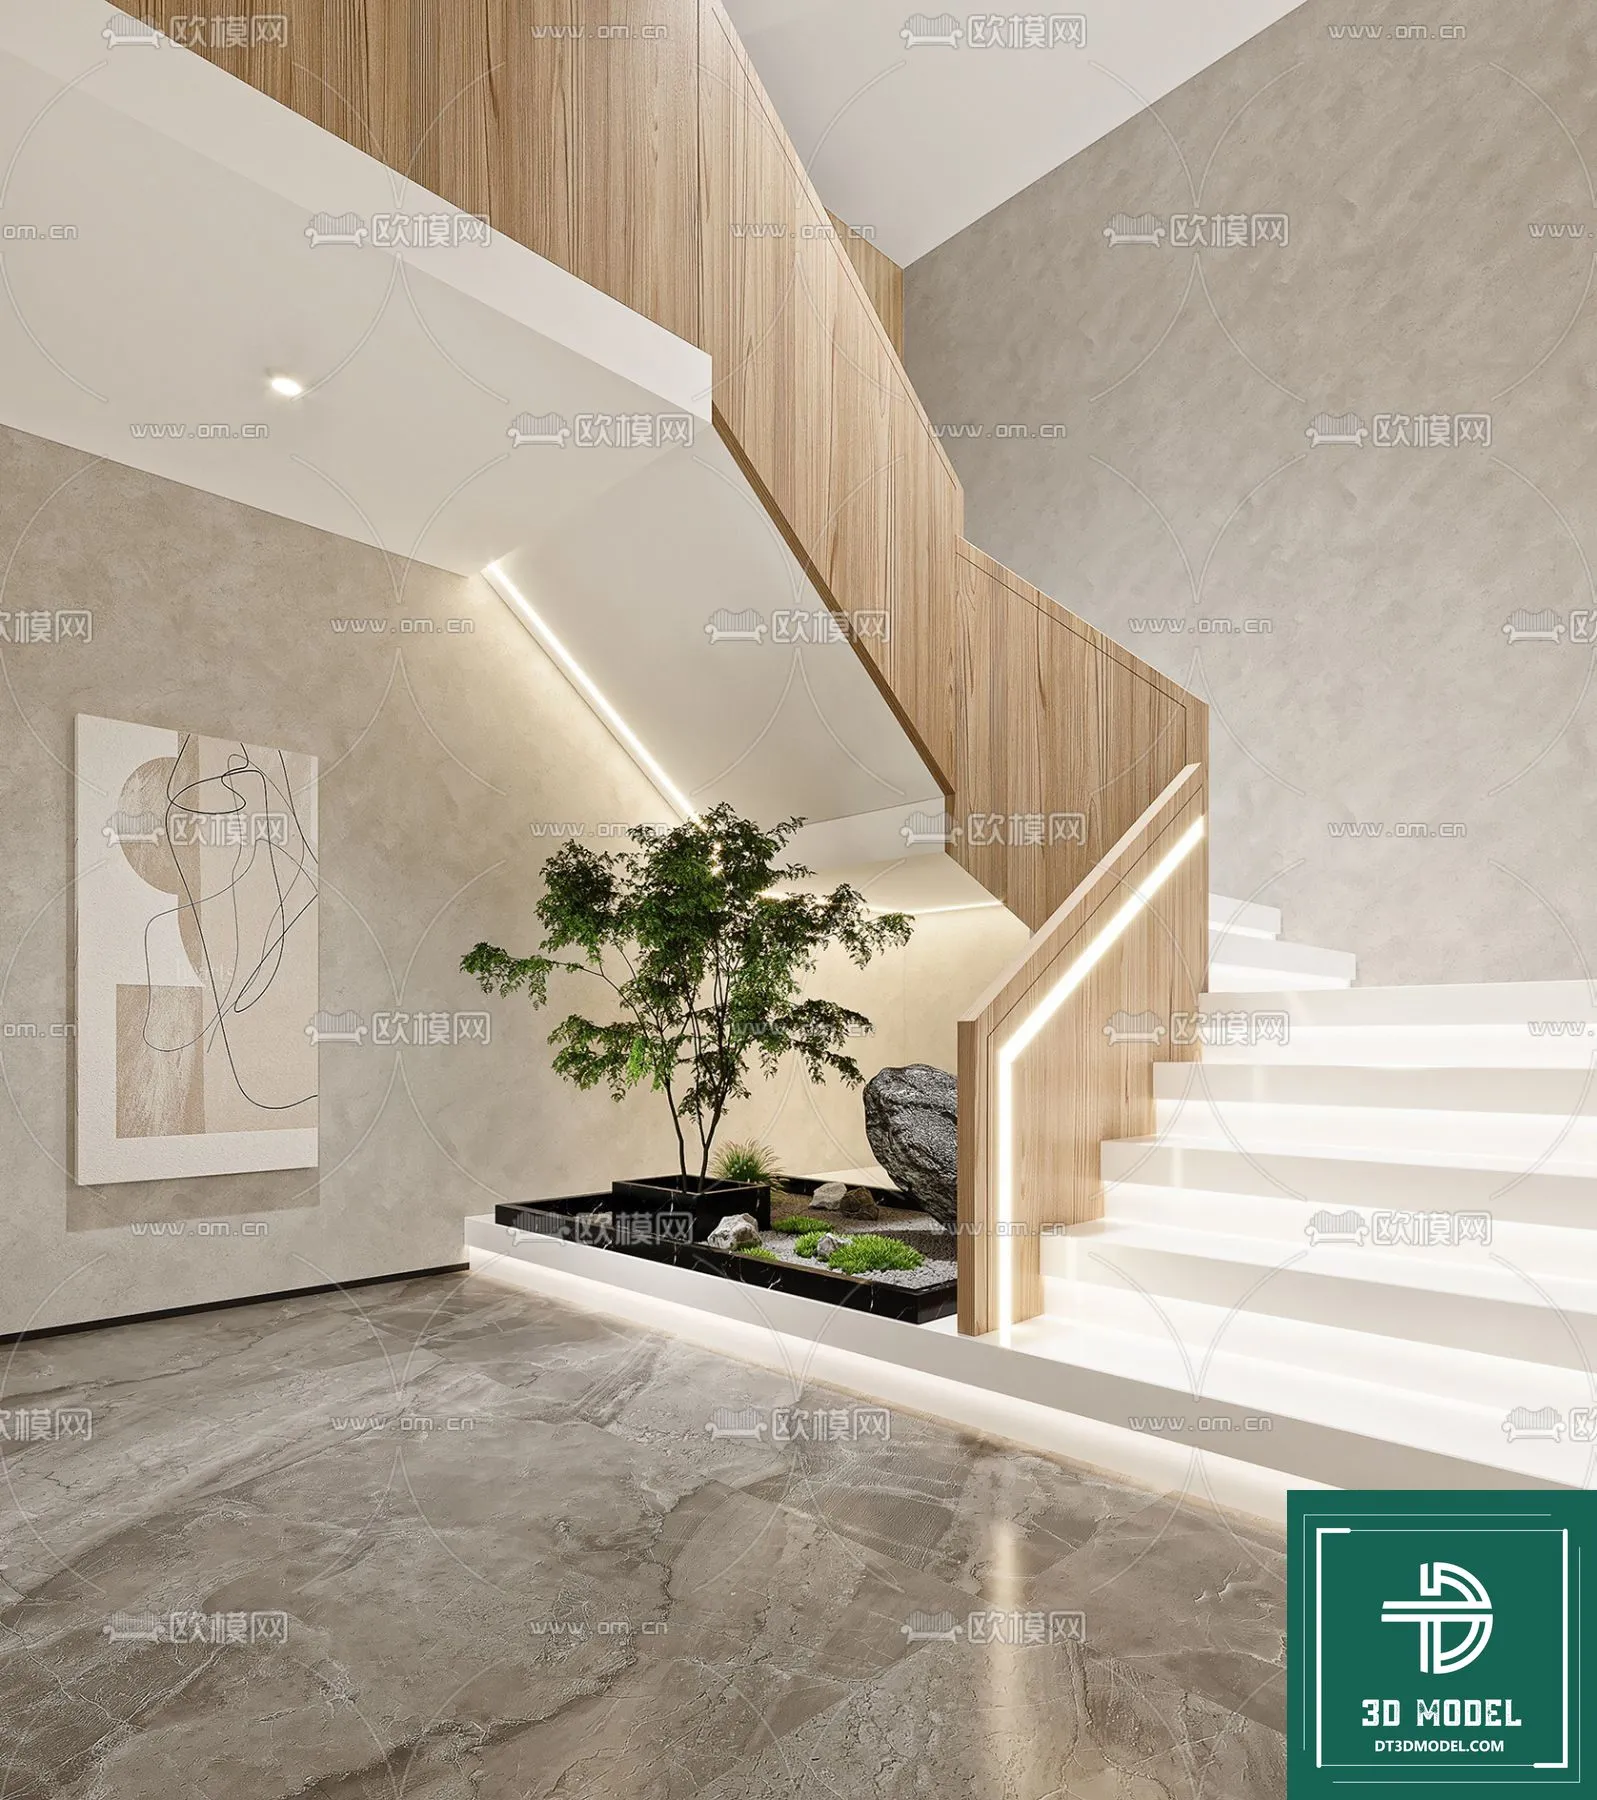 STAIR – 3DS MAX MODELS – 049 – PRO